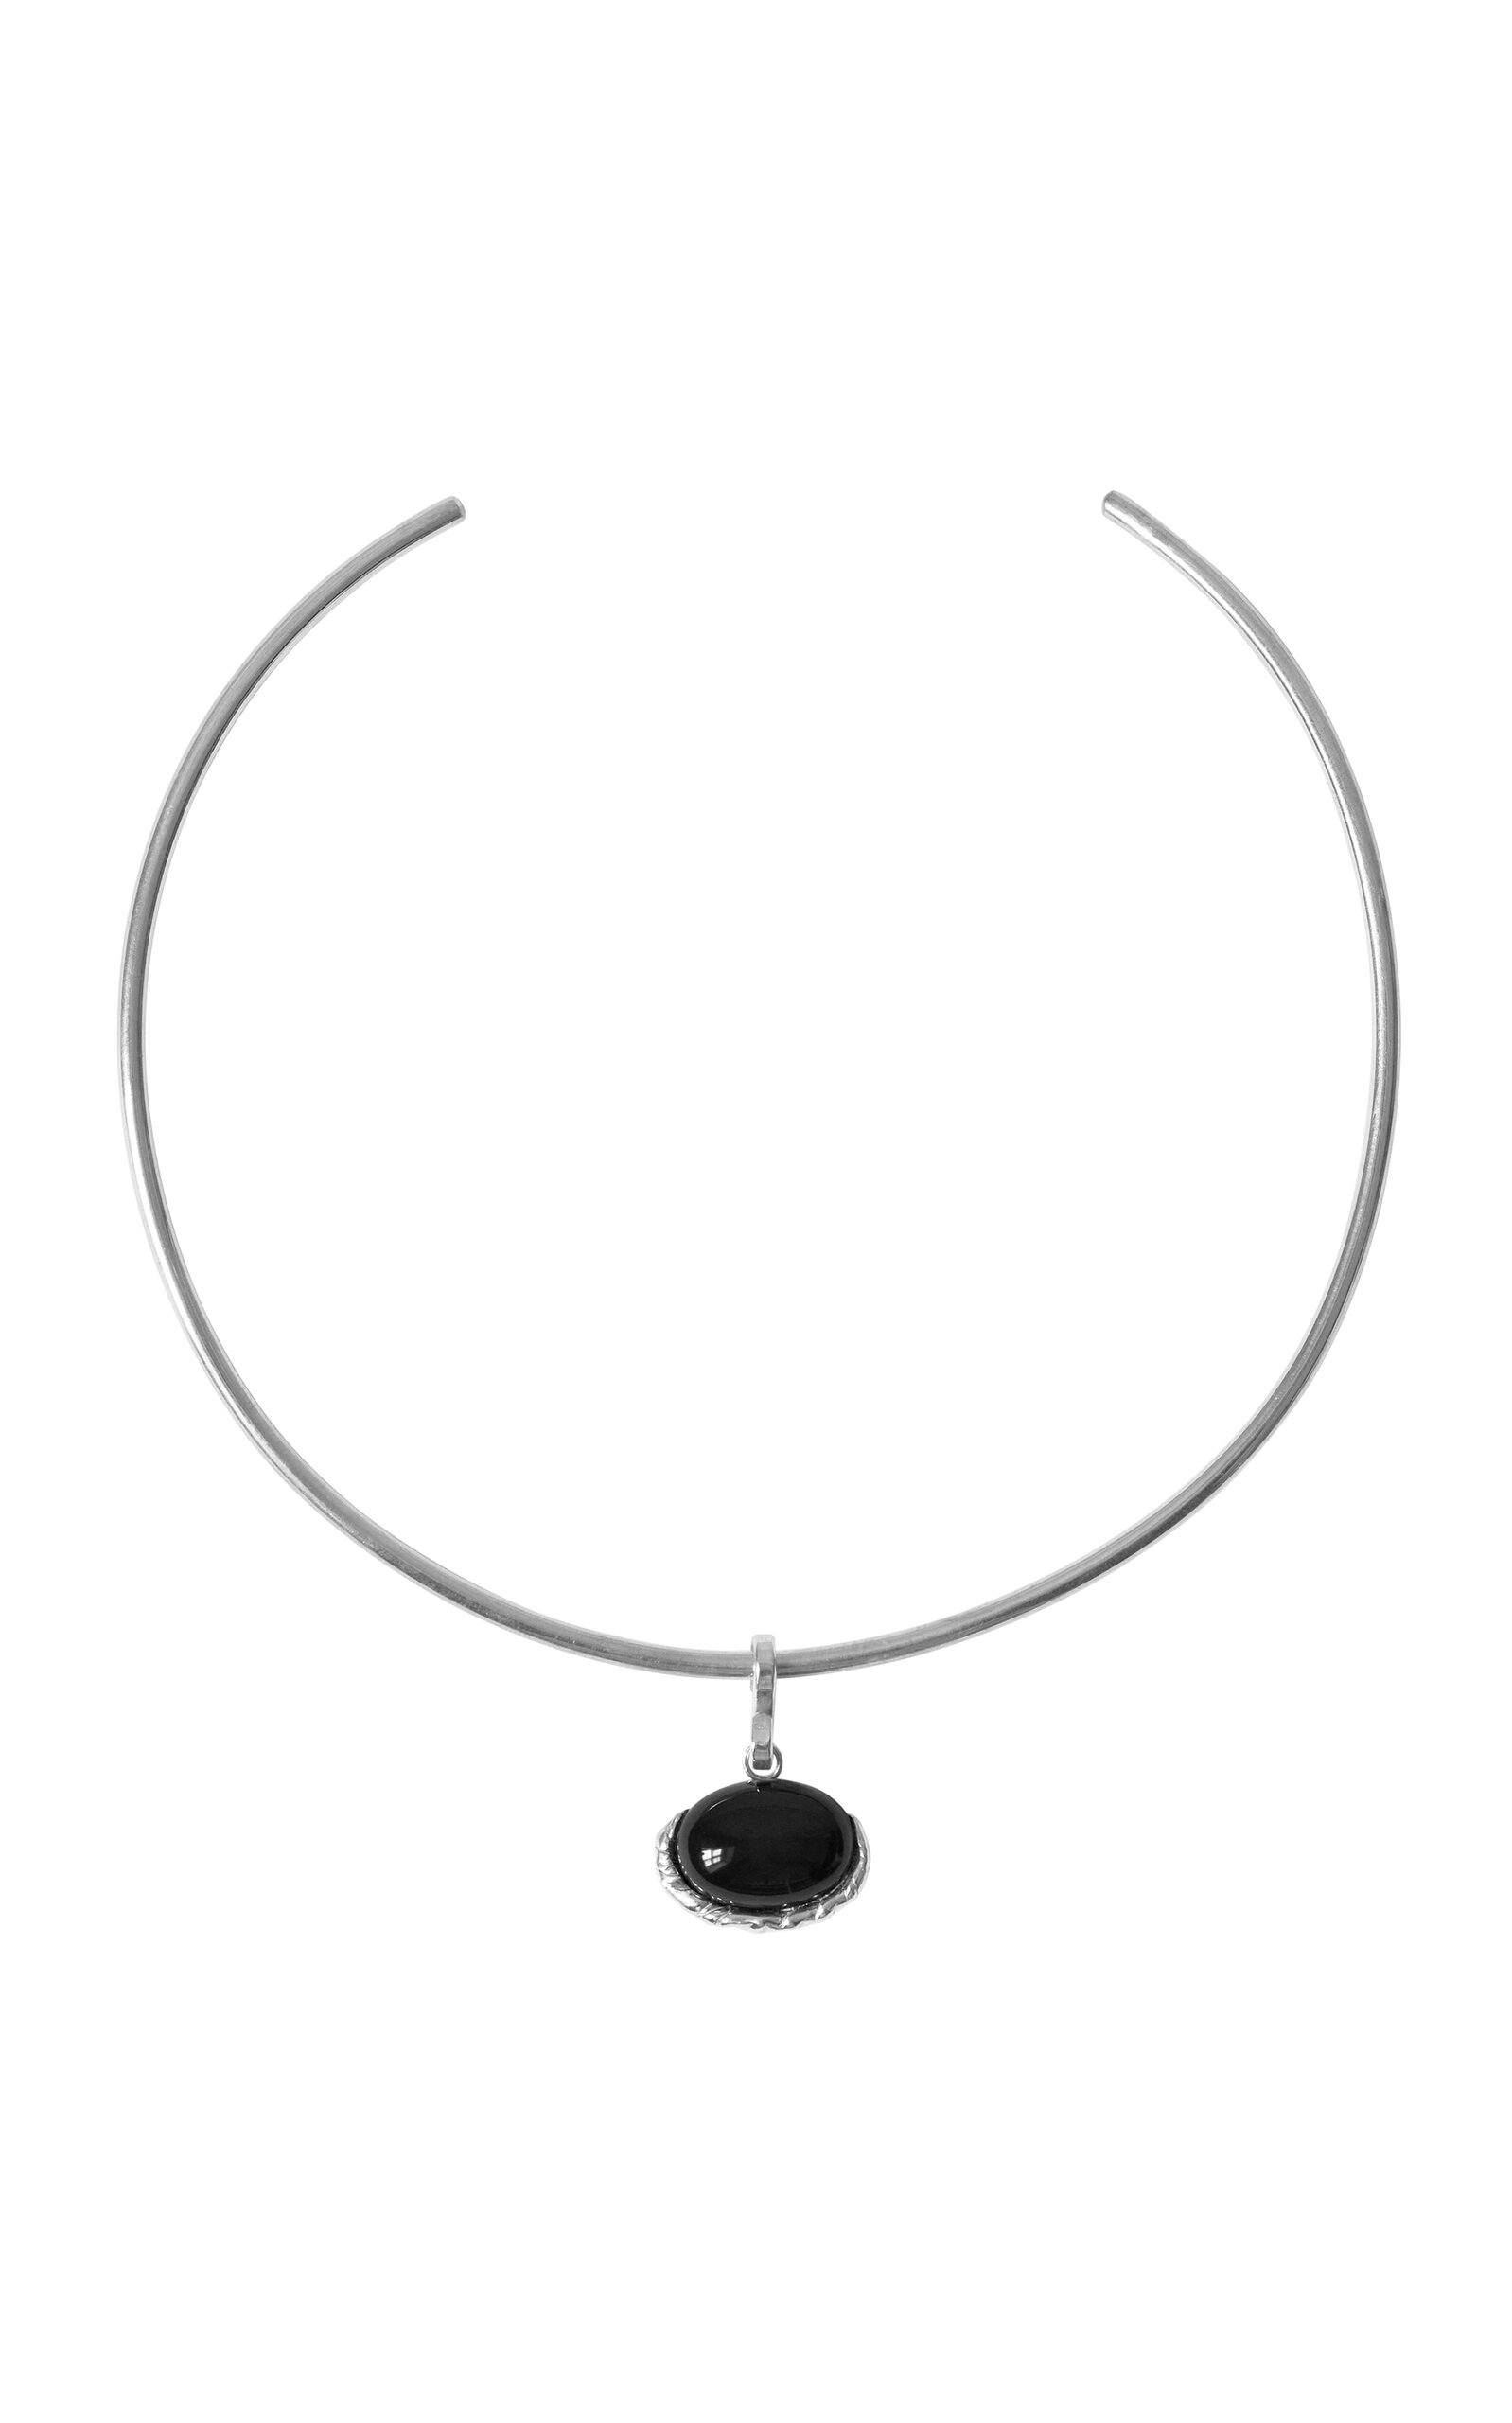 Corali Embleme Sterling Silver Collier